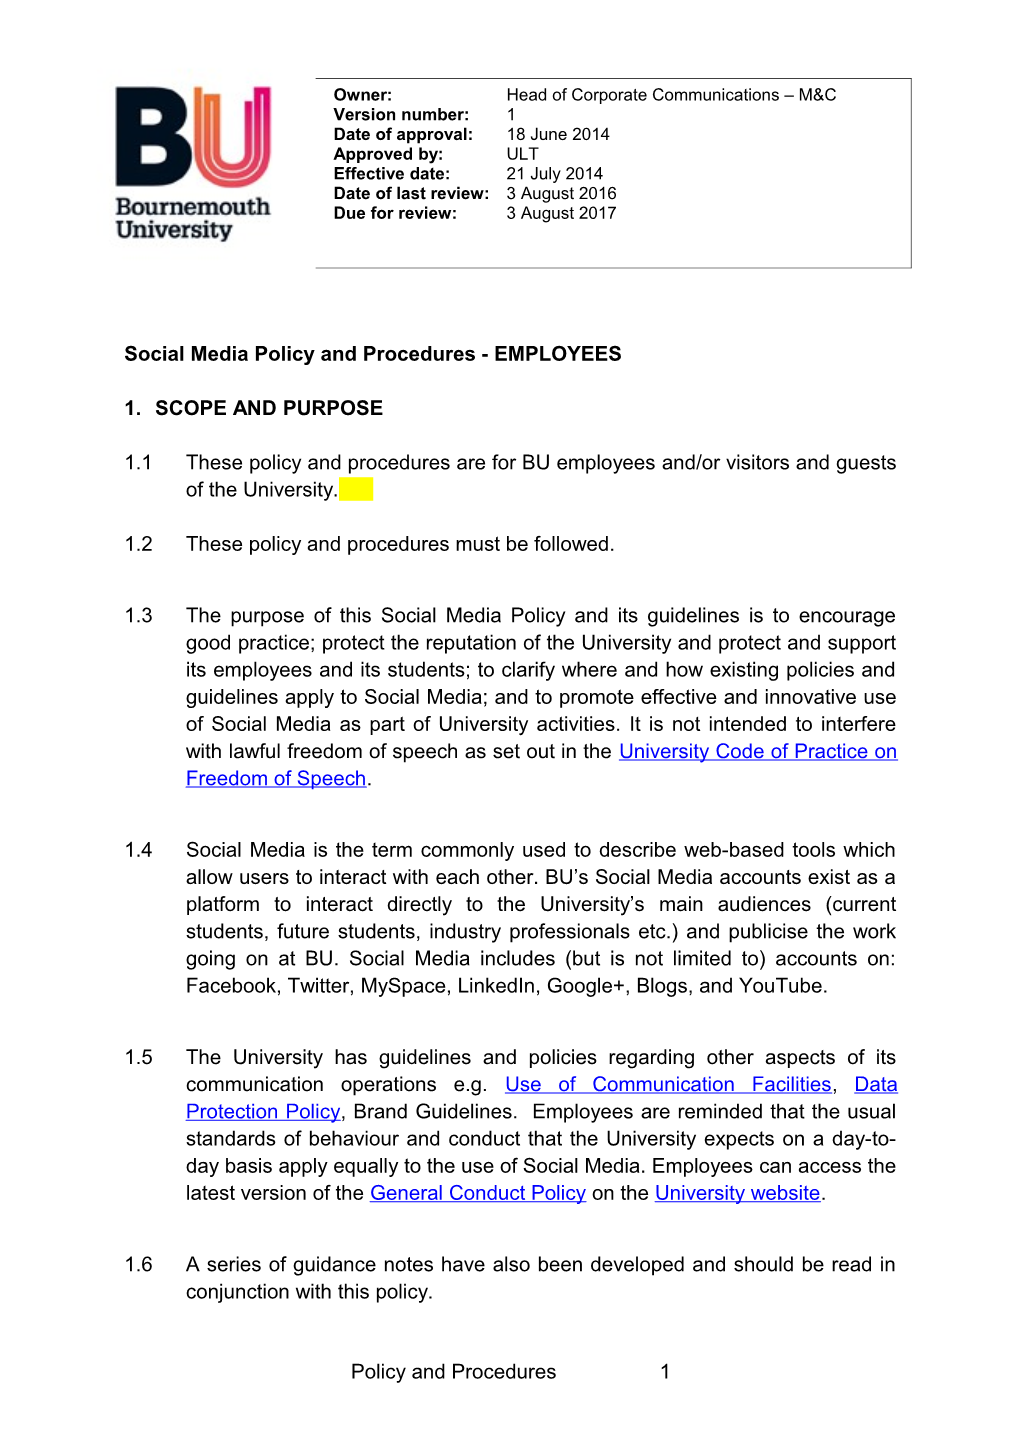 Social Media Policy and Procedures - EMPLOYEES